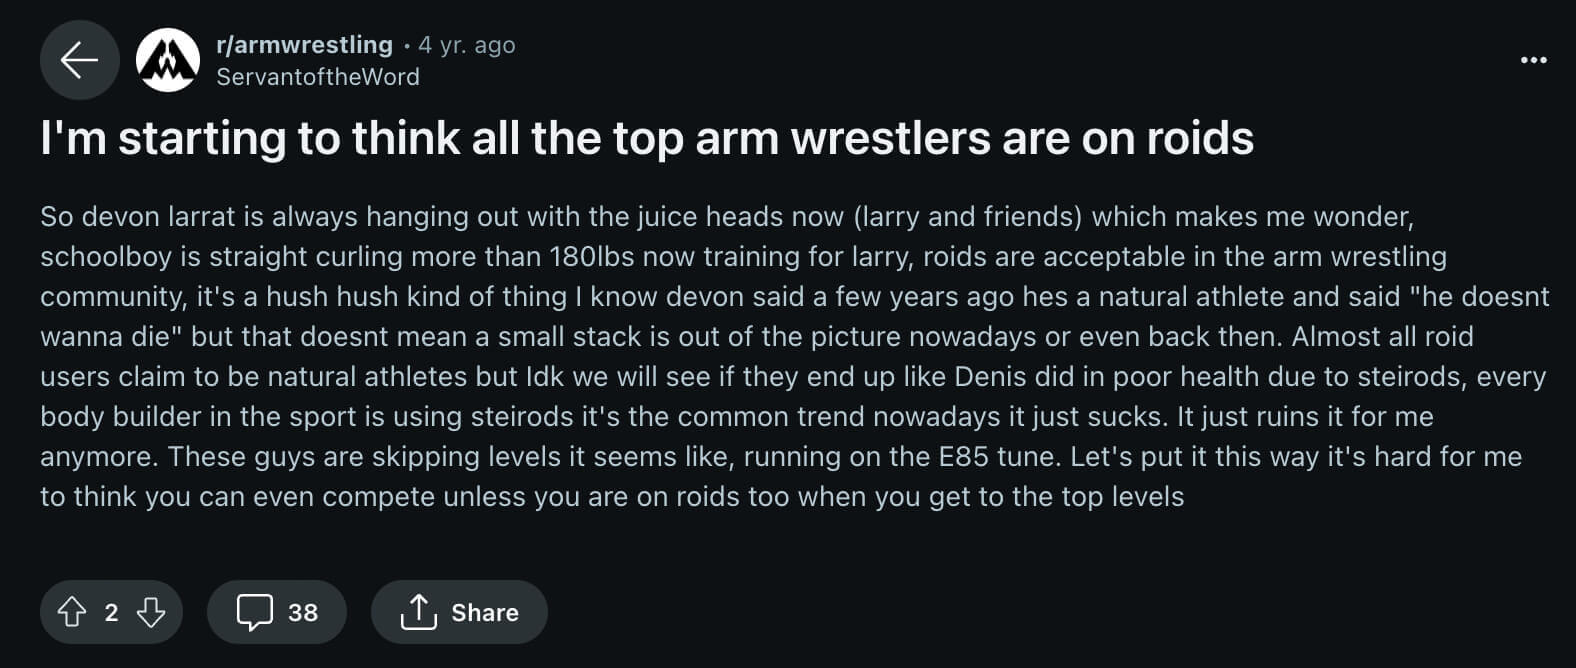 Reddit post about roids in arm wrestling competitions